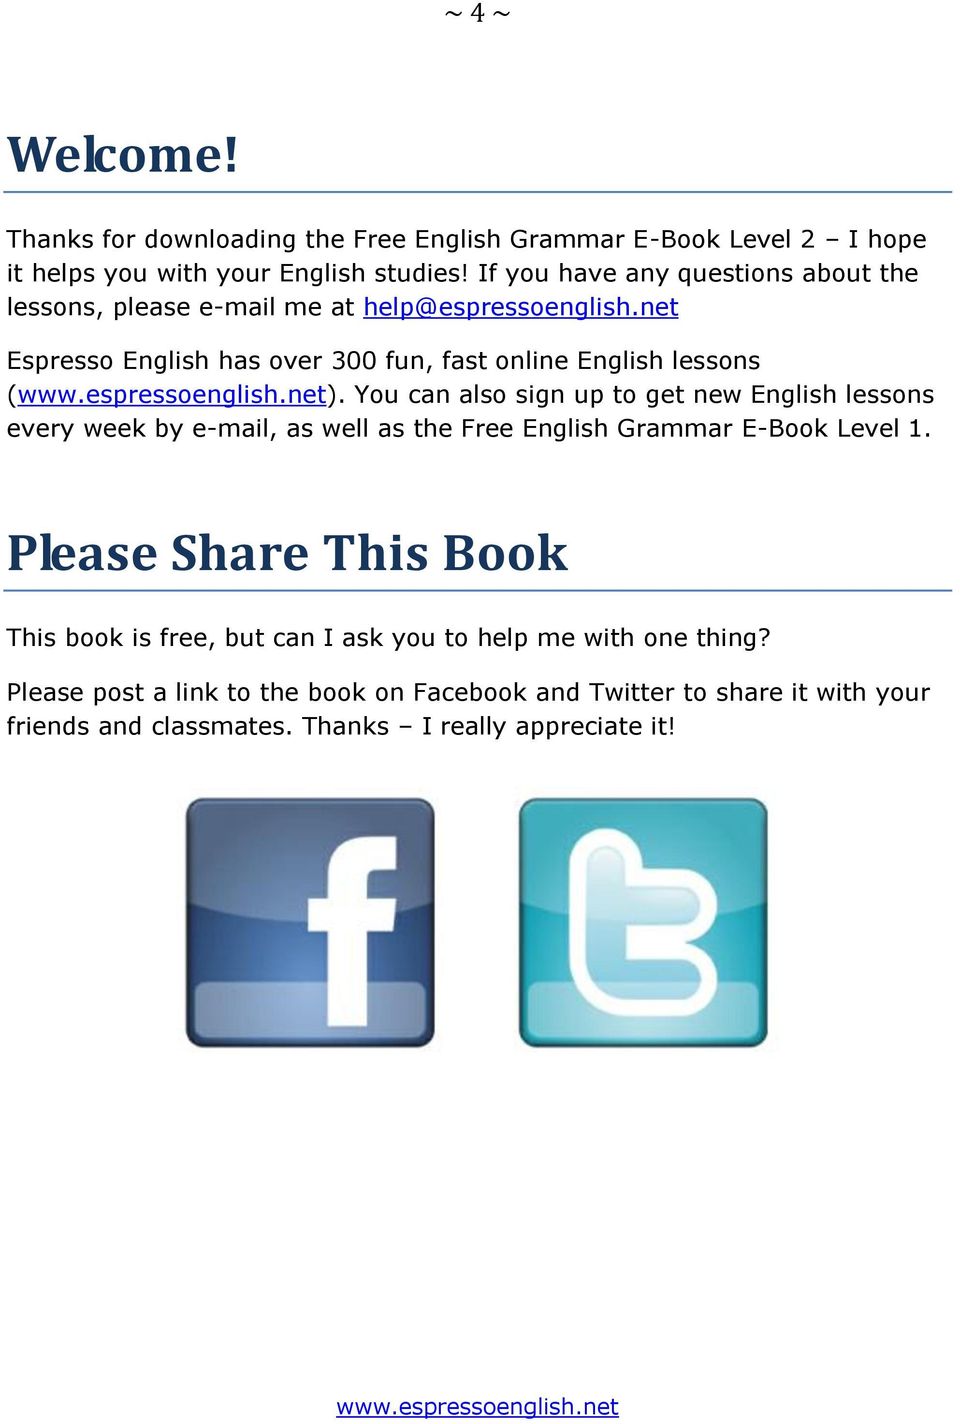 You can also sign up to get new English lessons every week by e-mail, as well as the Free English Grammar E-Book Level 1.